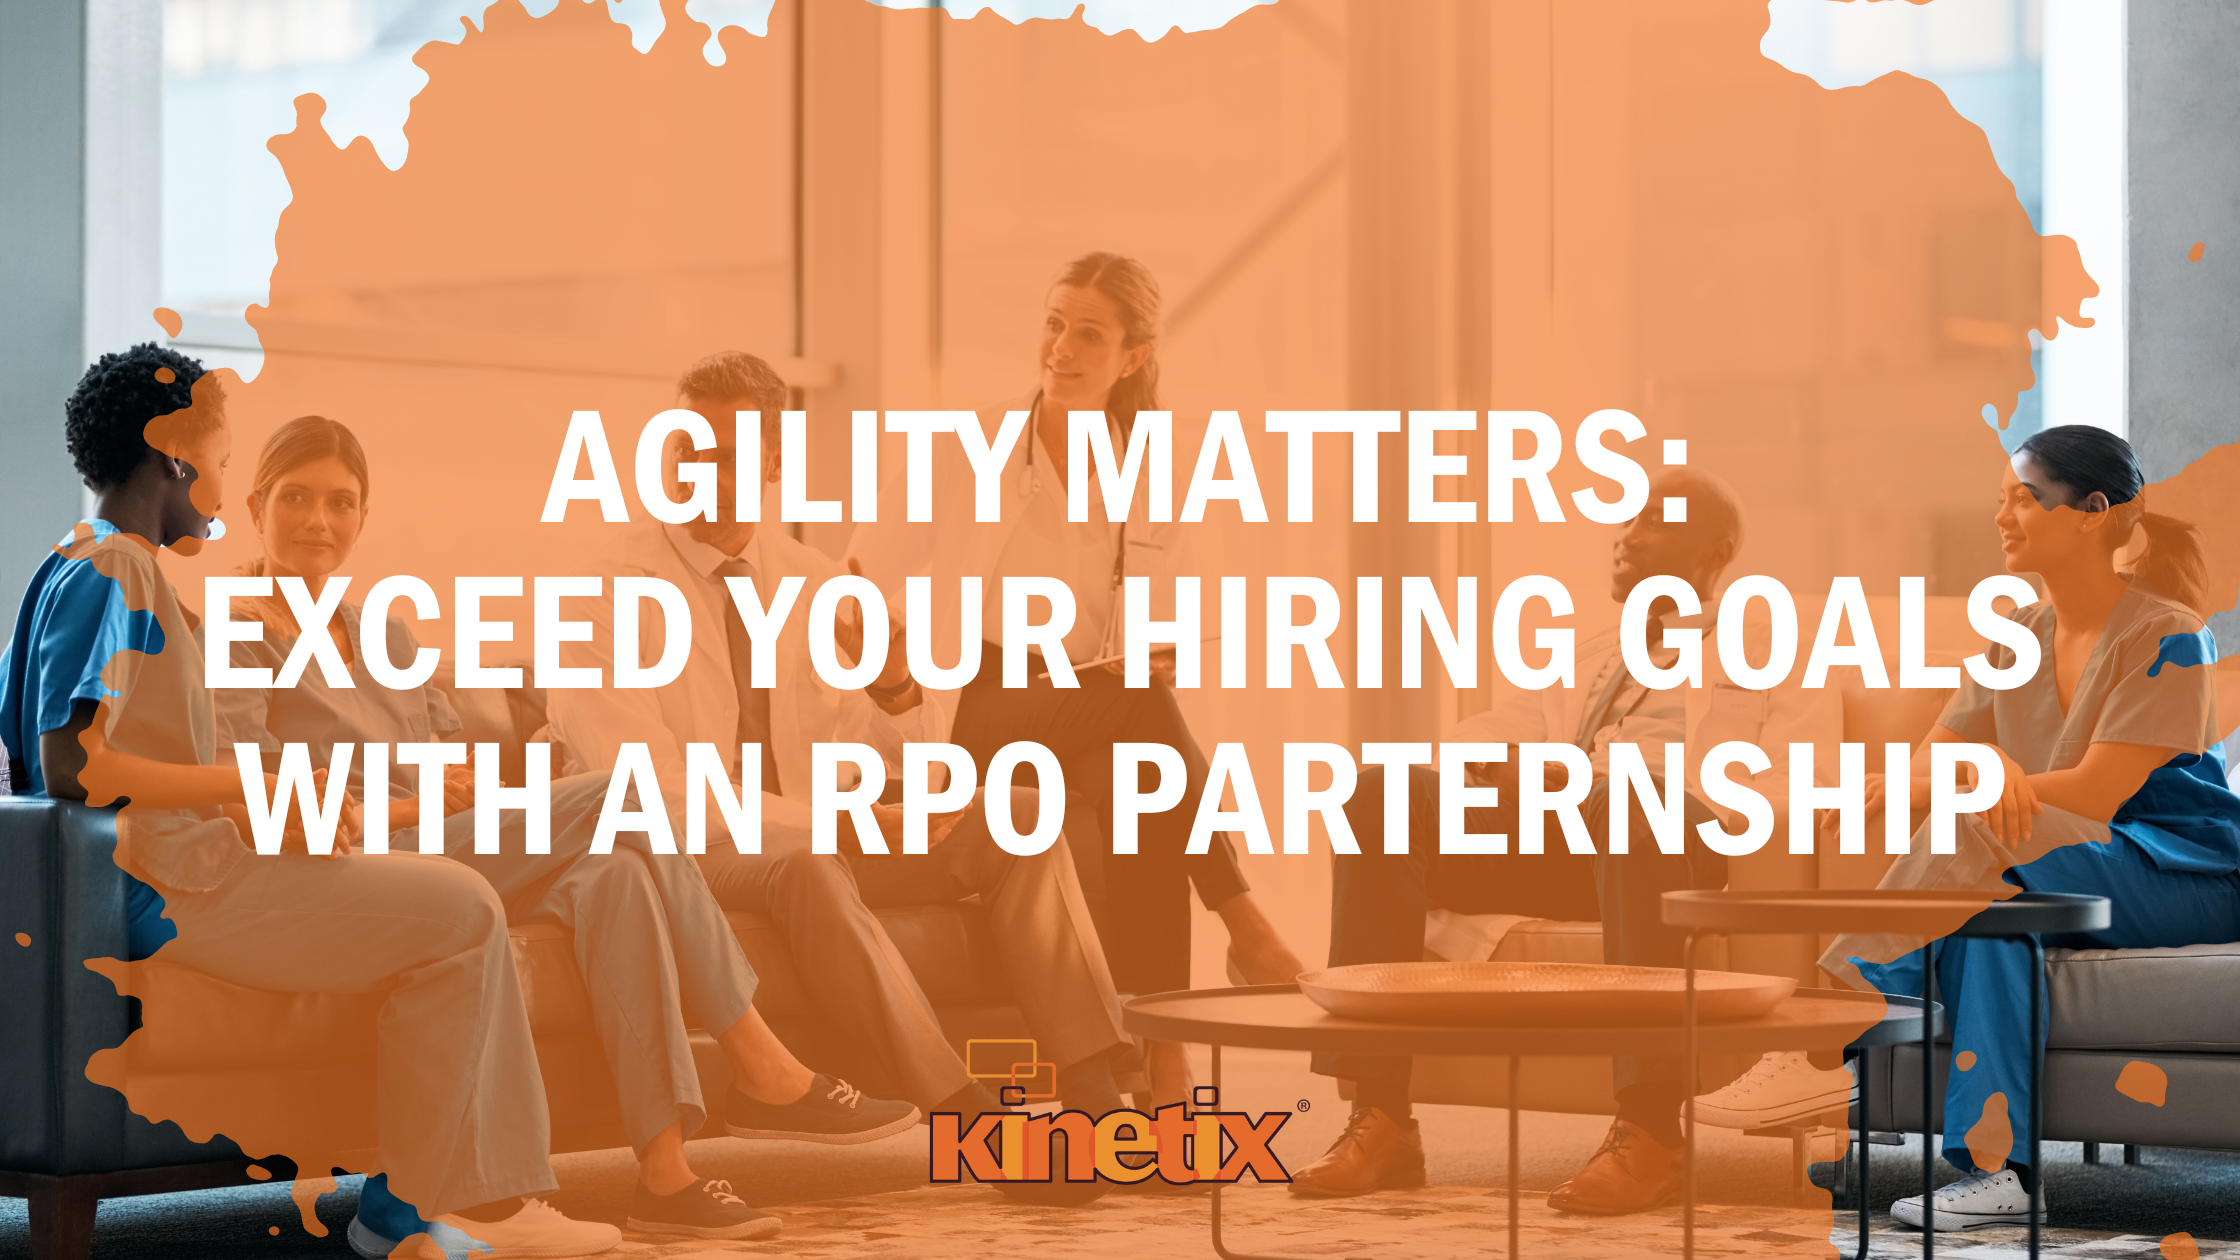 Agility Matters: Exceed Your Hiring Goals with an RPO Partnership